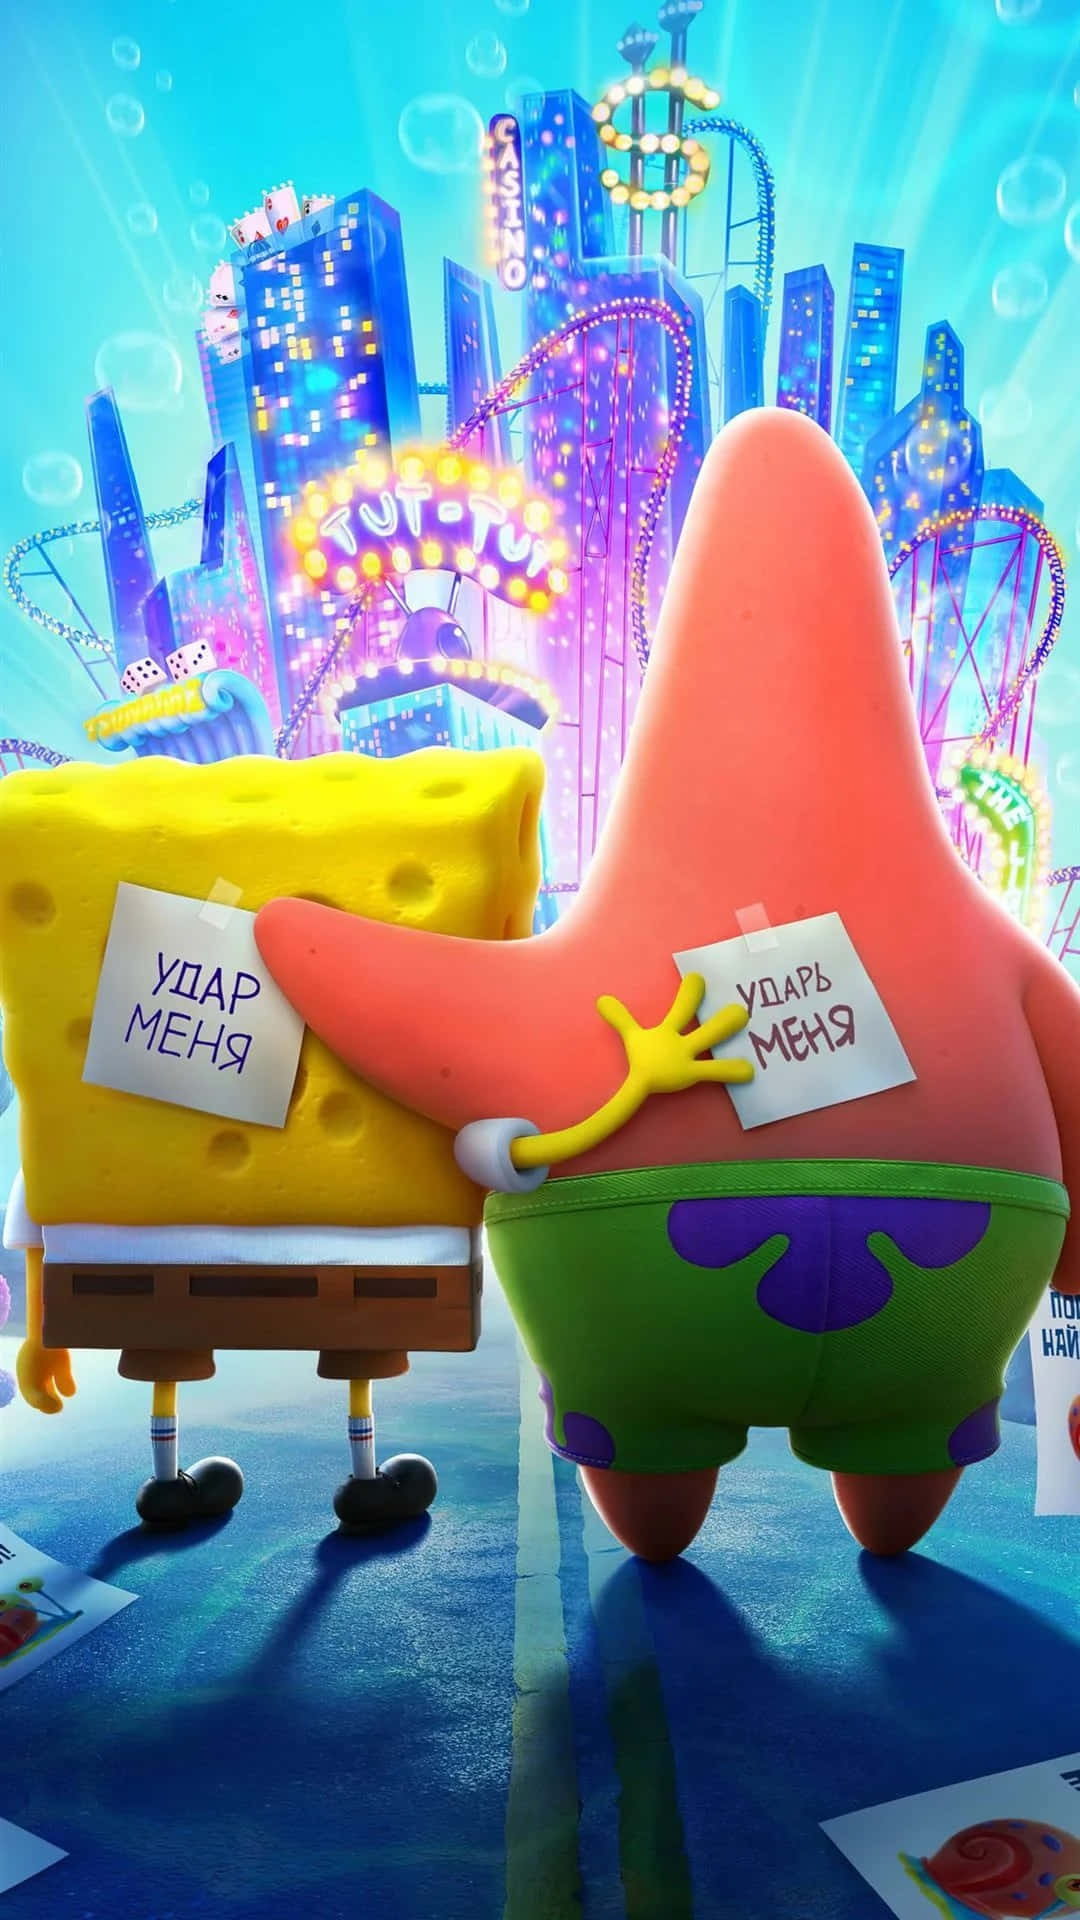 Spice Up Your Phone With This Dazzling Spongebob Iphone Wallpaper. Background